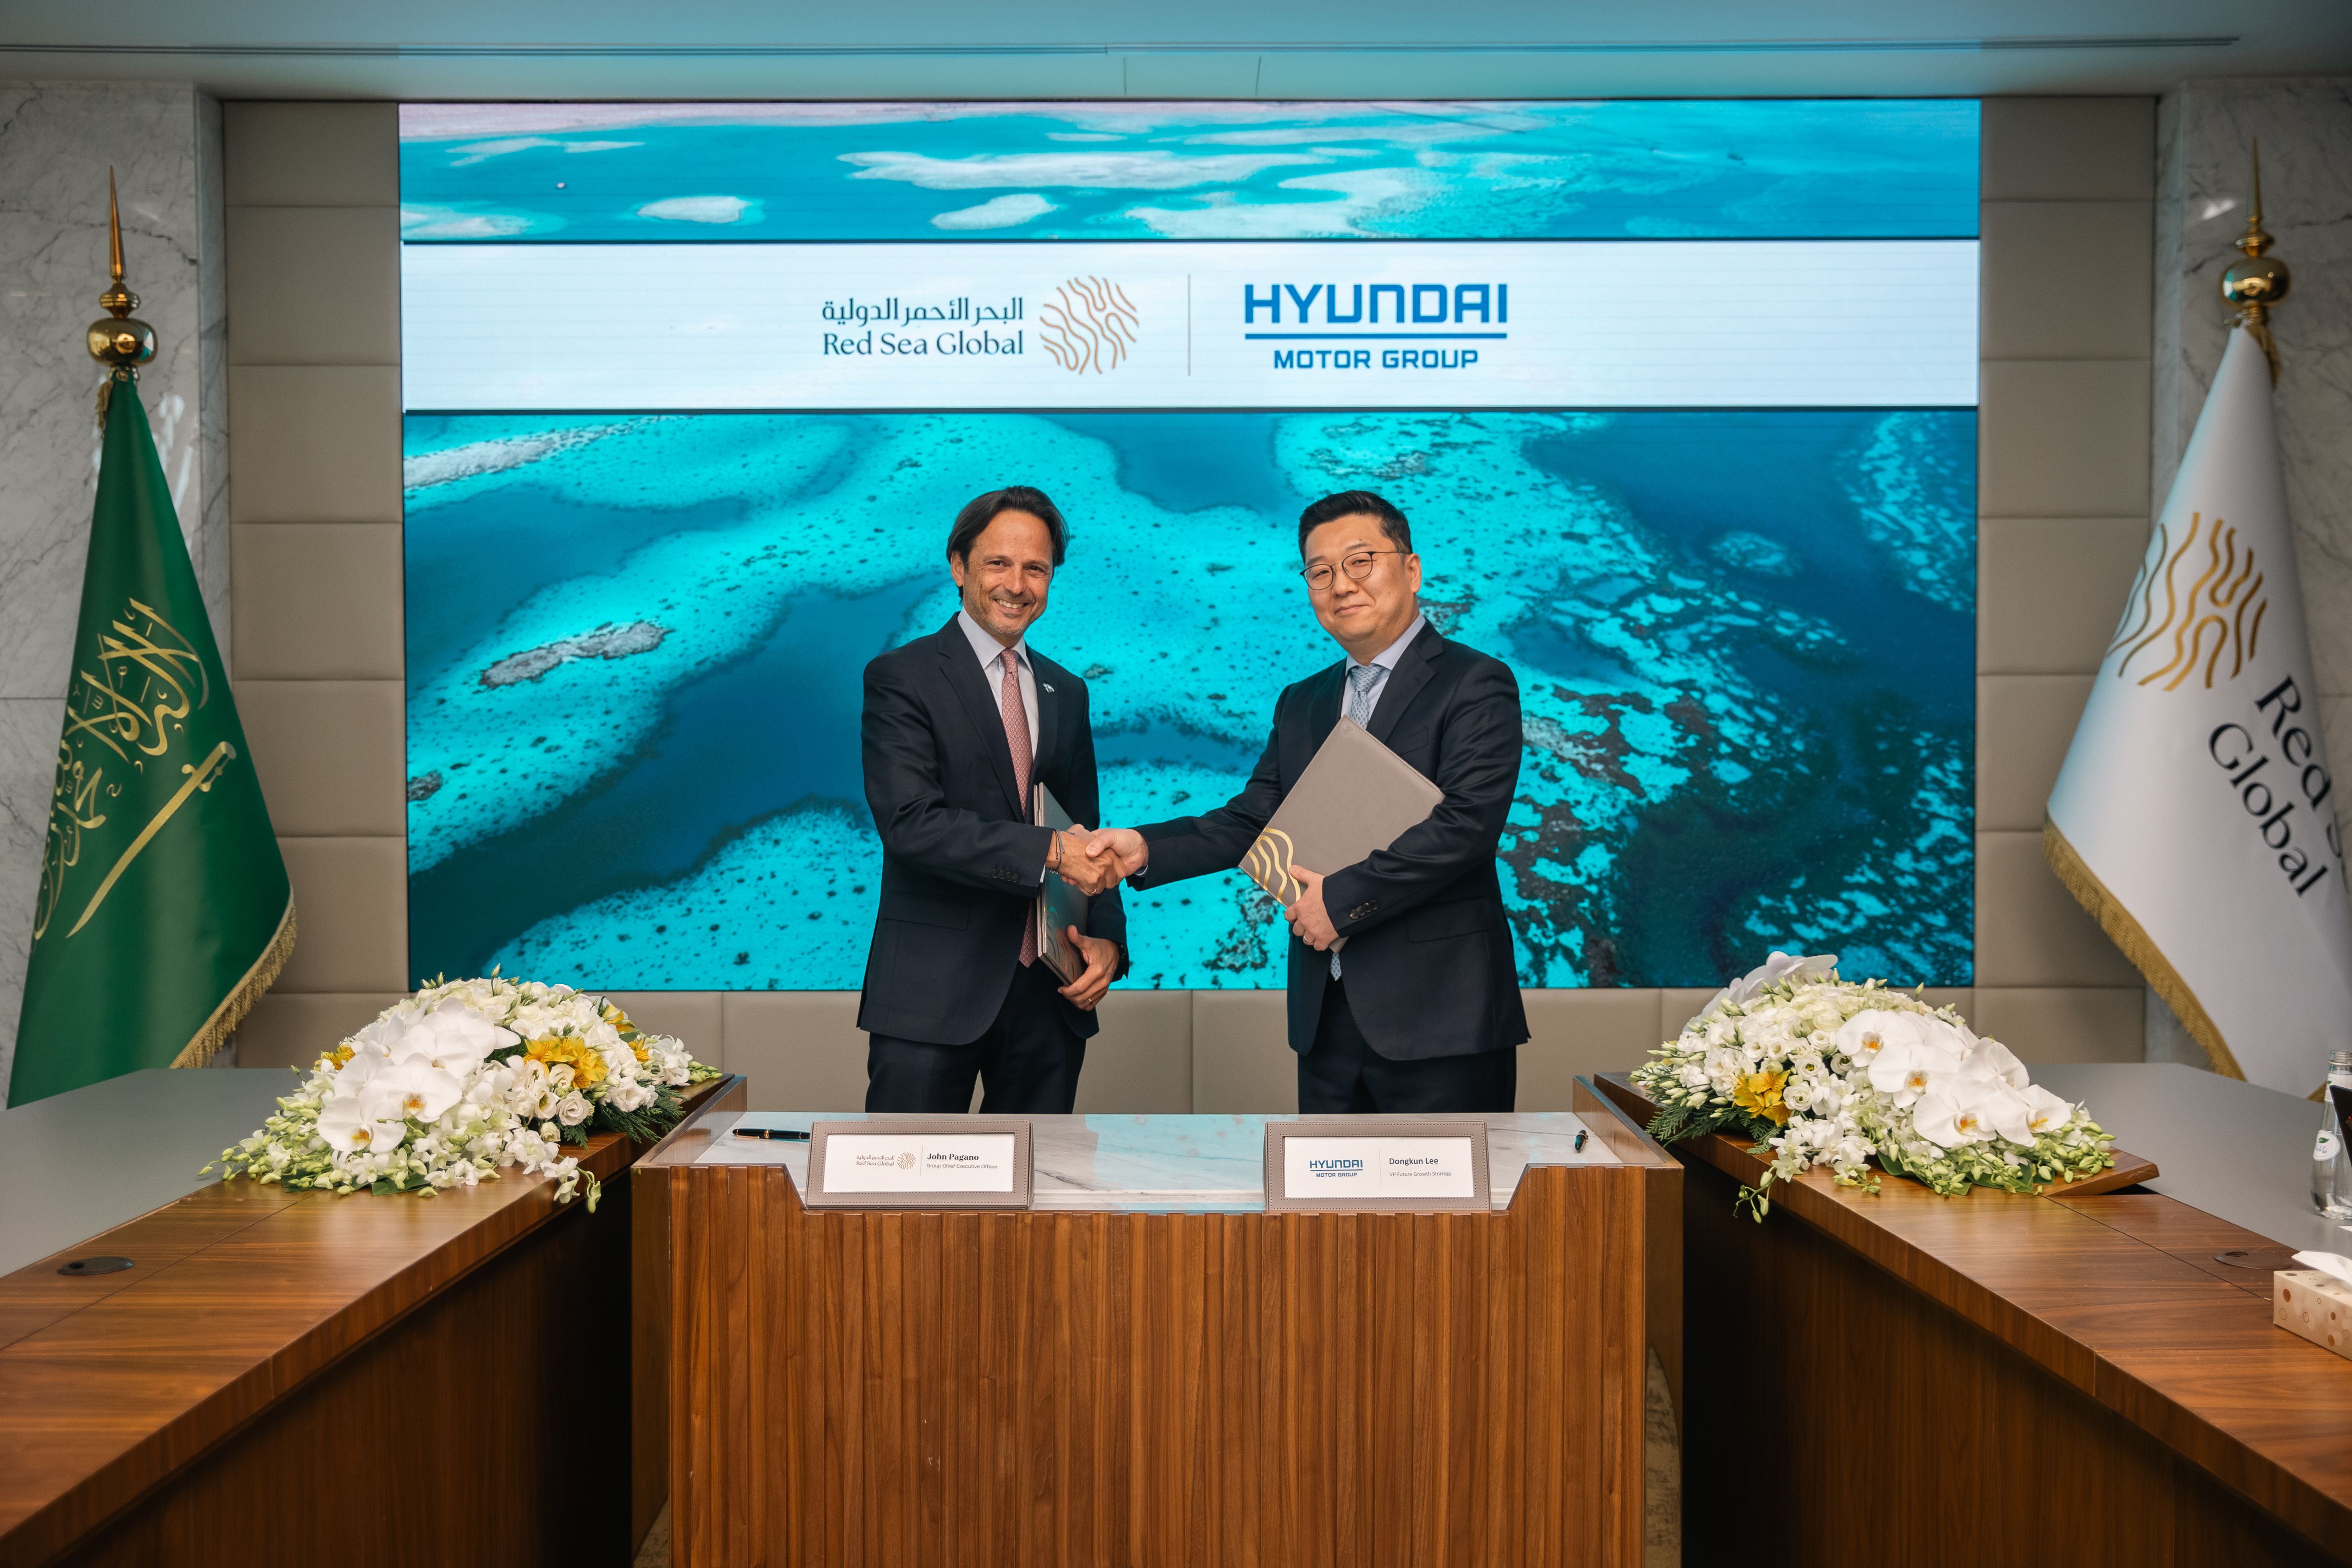 Red Sea Global and Hyundai Motor Group drive eco-friendly mobility solutions in developer’s luxury resorts